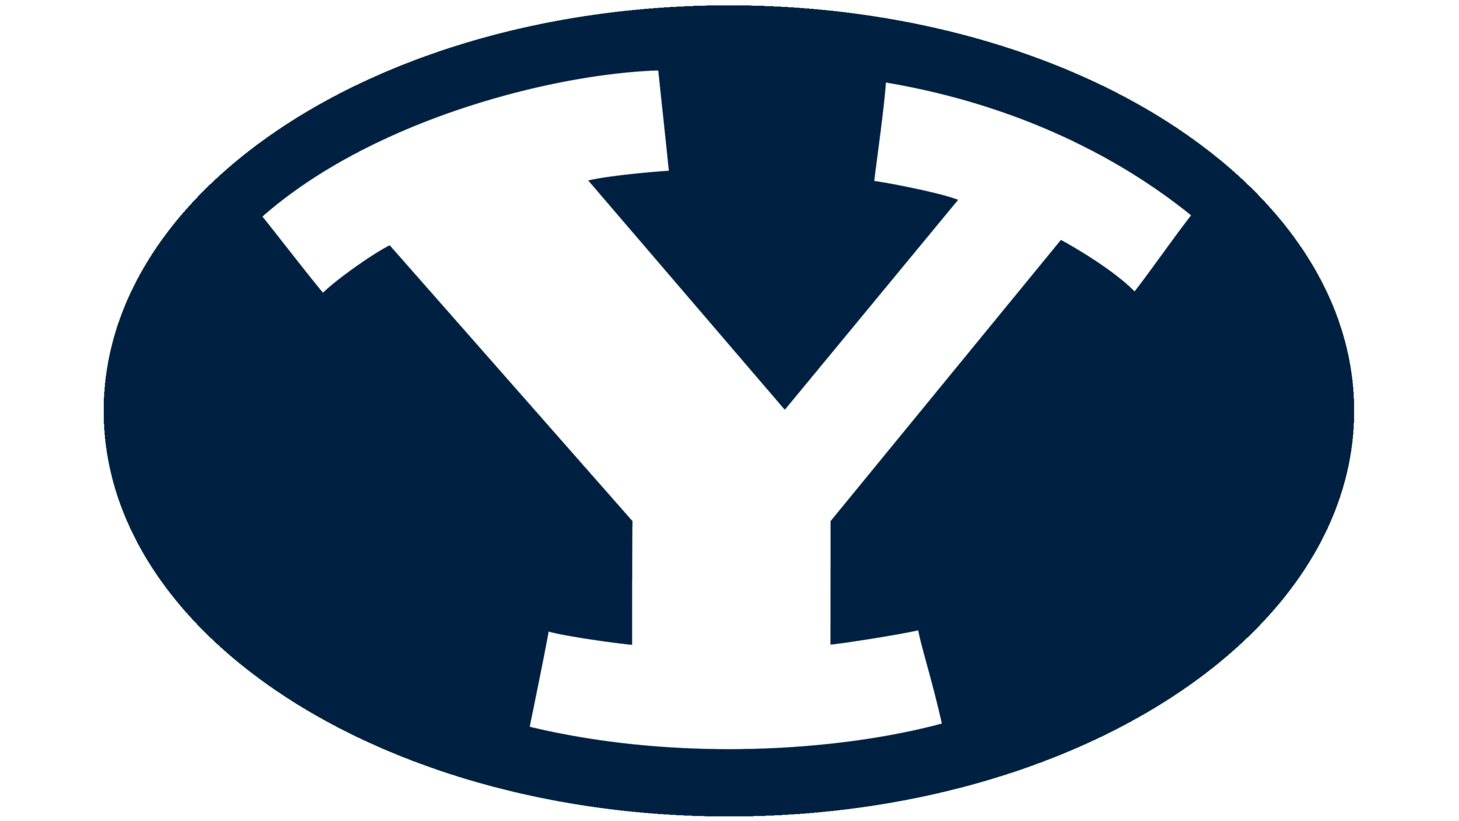 Brigham young cougars sign 2005 present